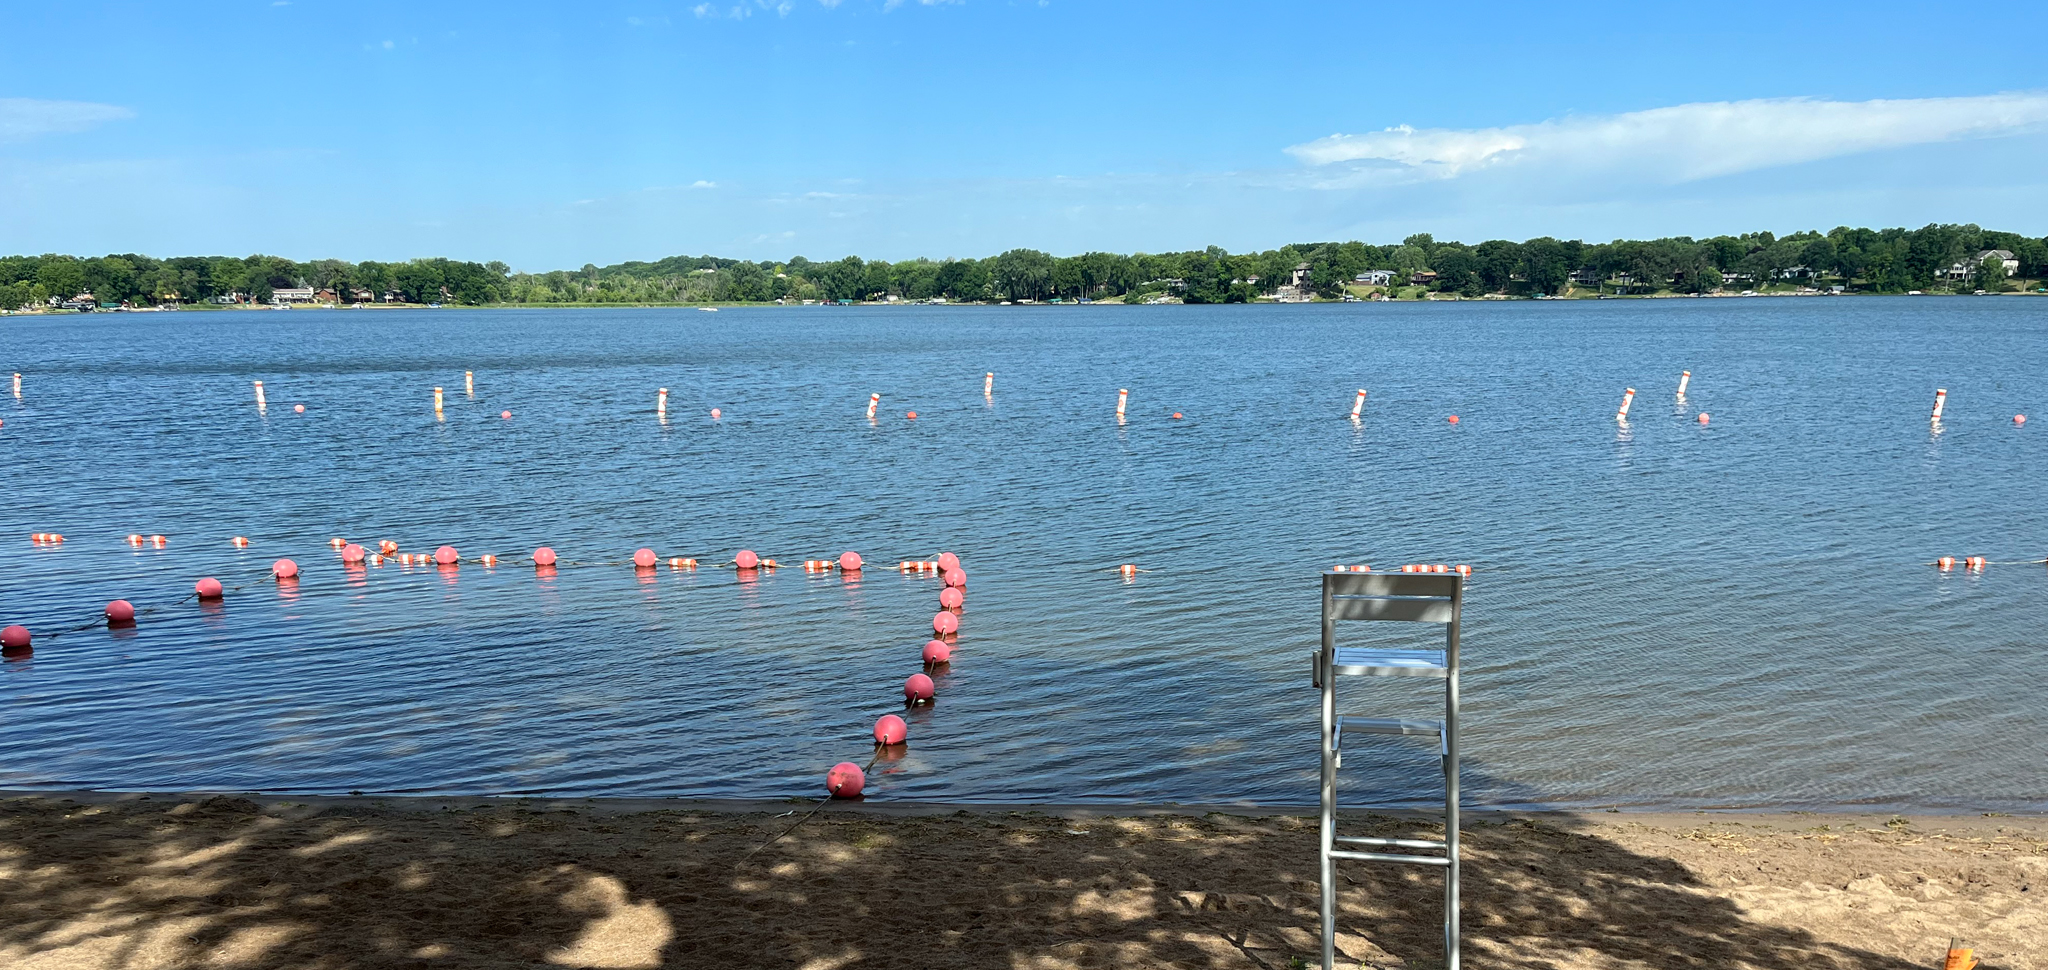 Lake with a beach and empty lifeguard chair